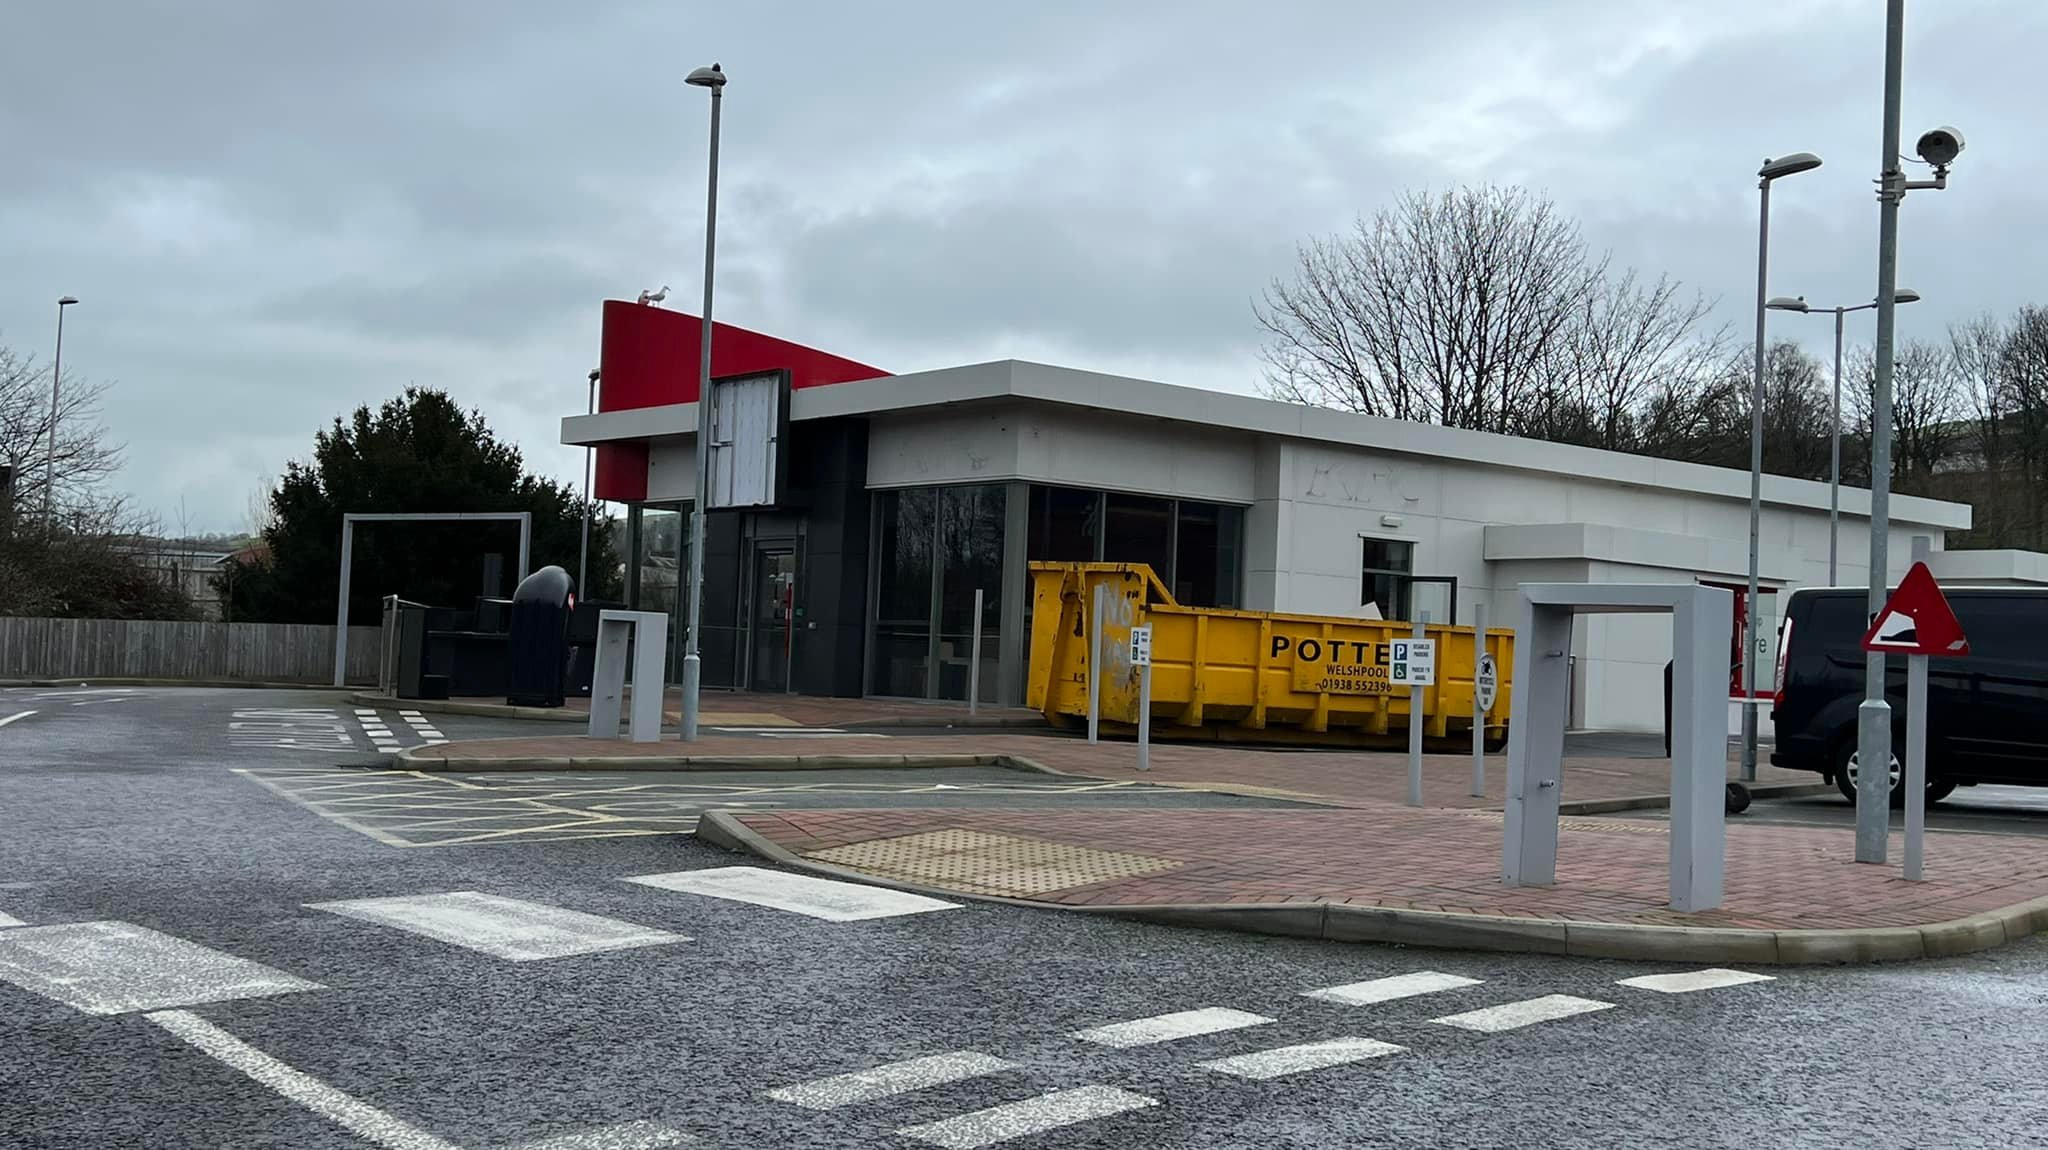 Work has begun on the newly closed KFC branch in Newtown. Picture by Paul Williams.